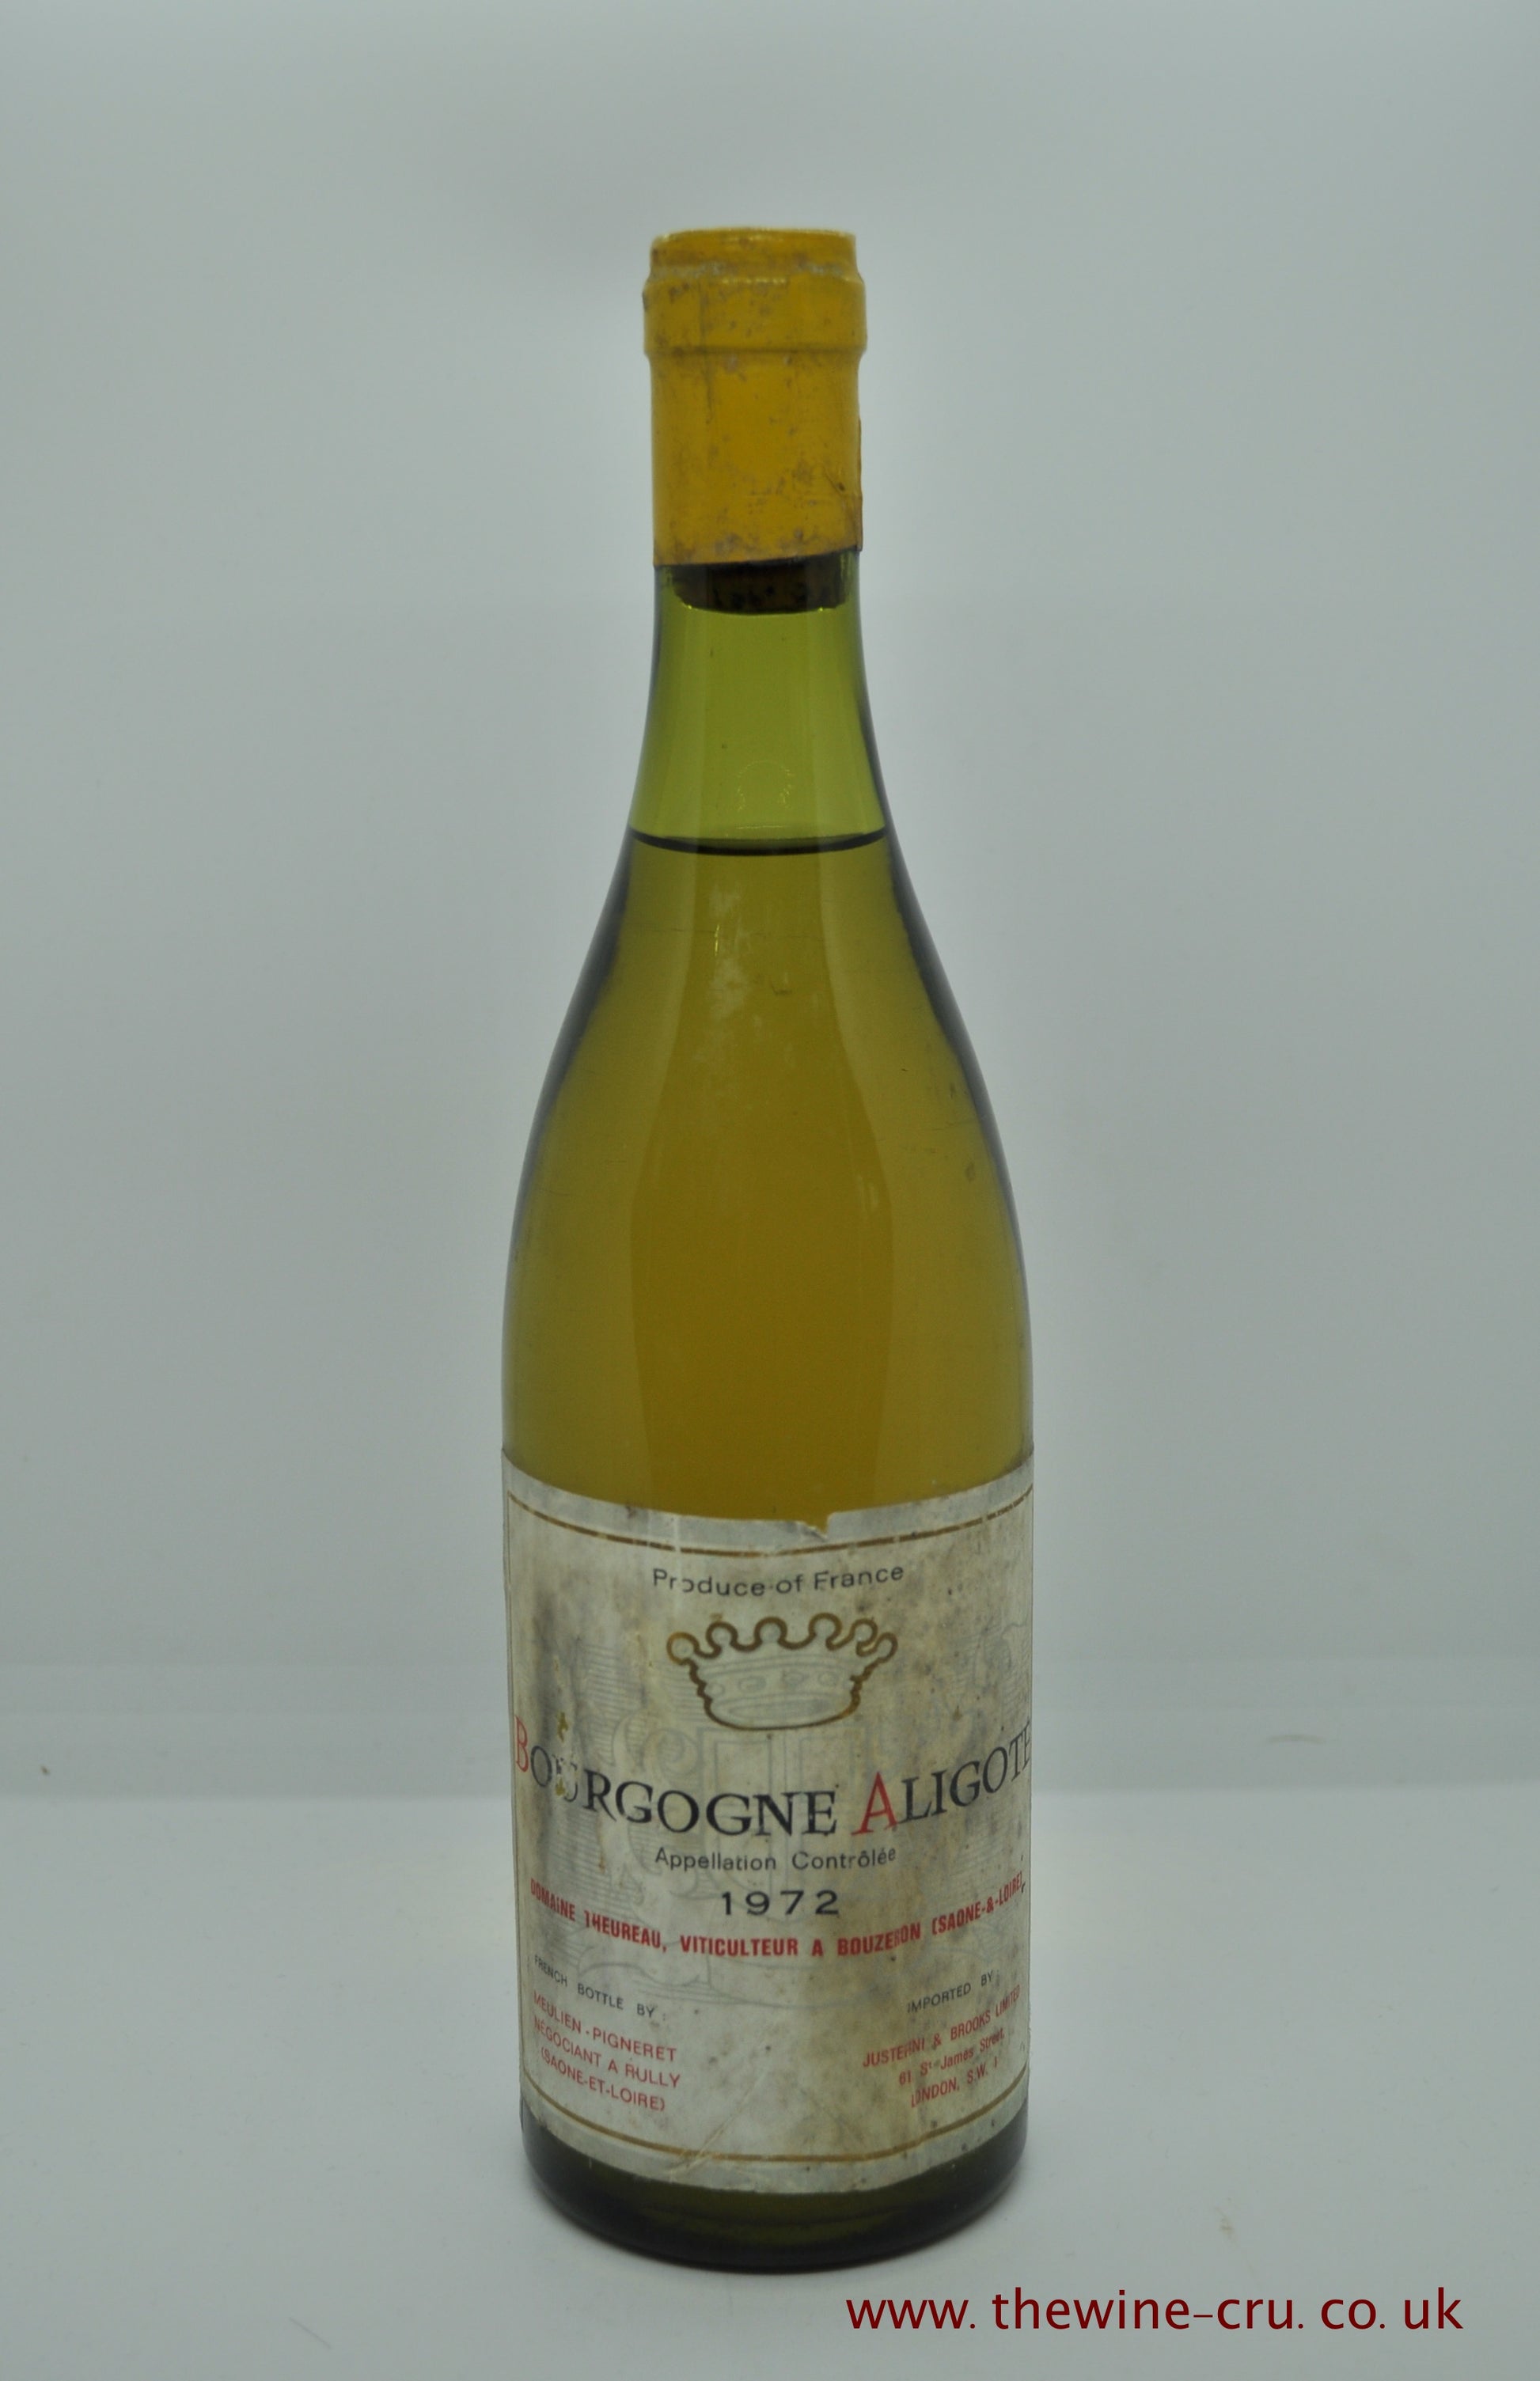 A bottle of 1972 vintage white wine. Domaine Theureau Bourgogne Aligote 1972. France, Burgundy. Immediate delivery. Free local delivery. Gift wrapping available.